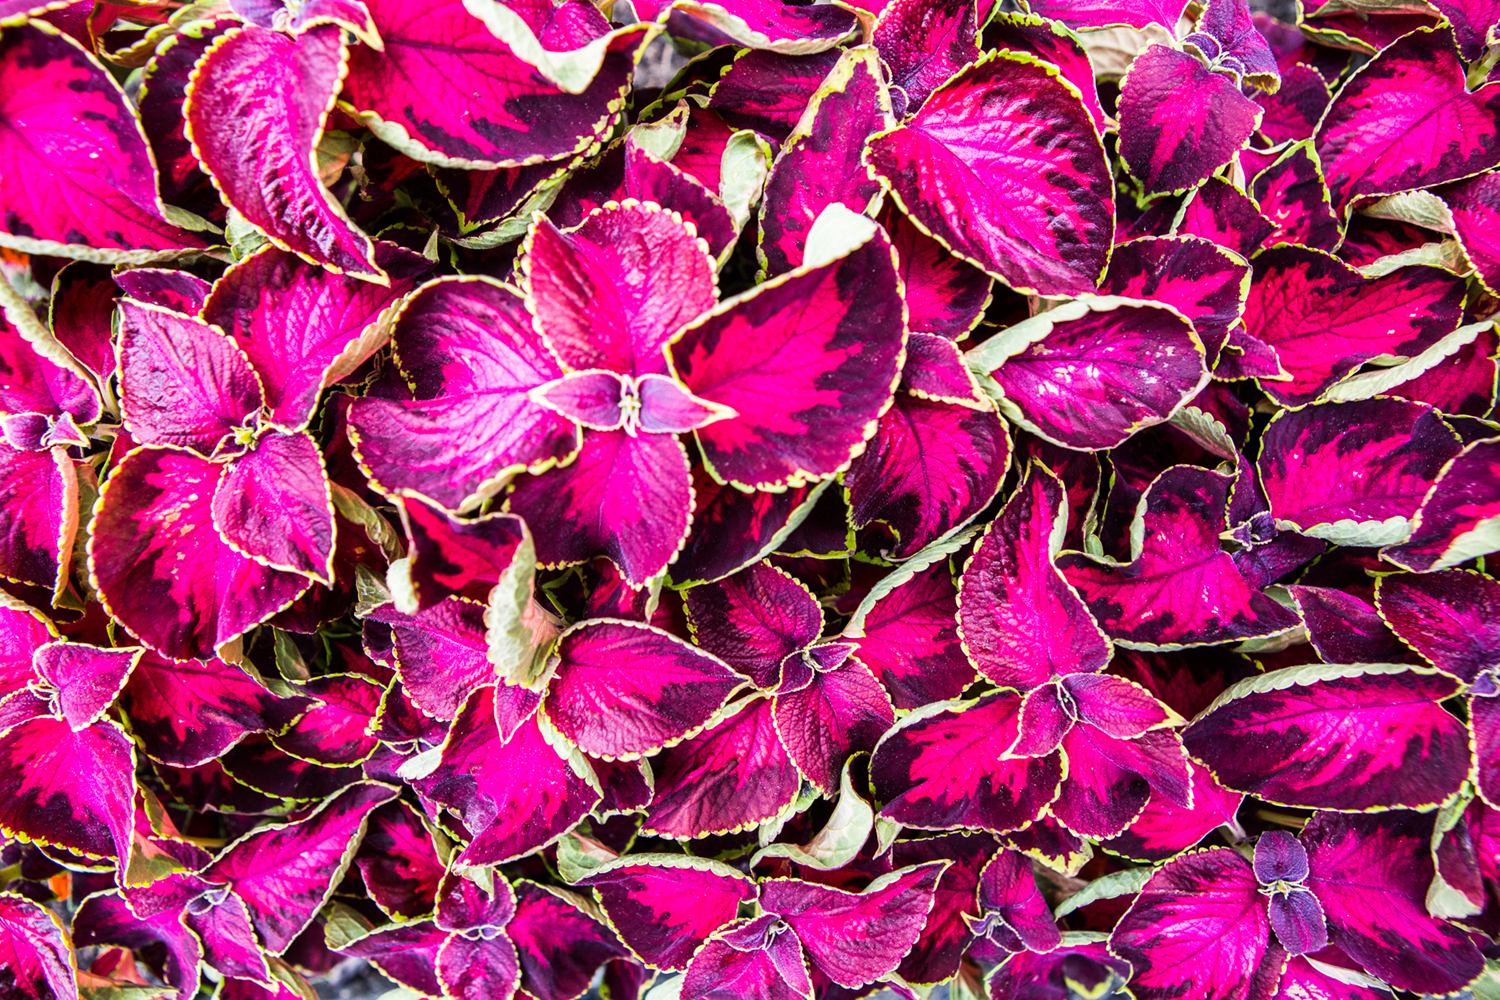 Pink Coleus plants are seen throughout campus. UF Photo by JR Ancheta